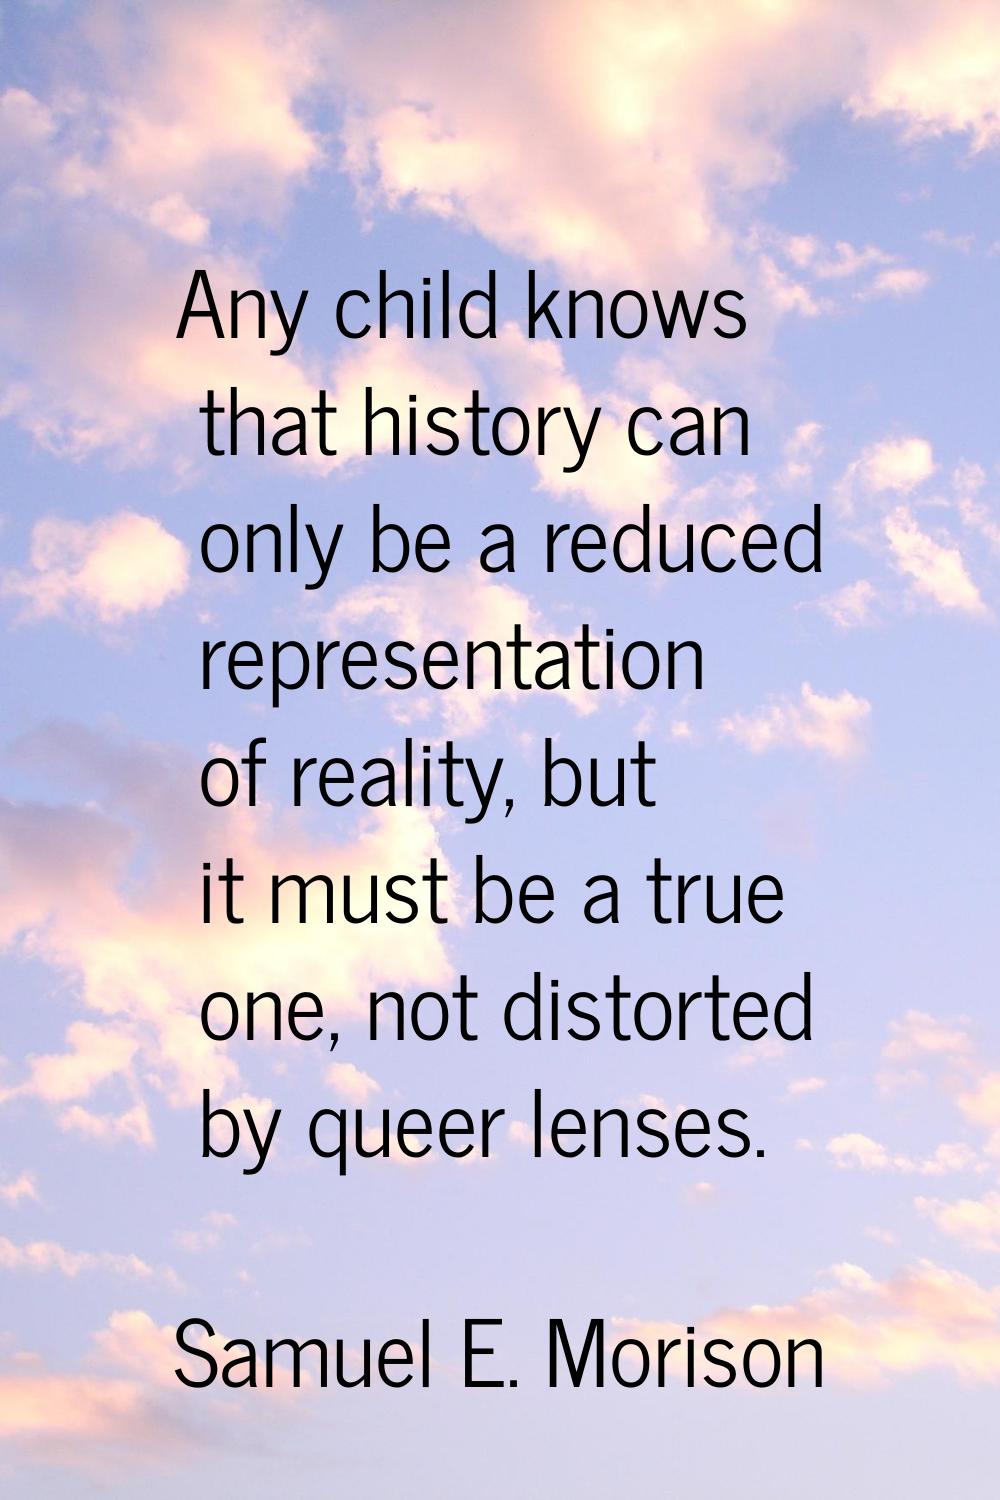 Any child knows that history can only be a reduced representation of reality, but it must be a true